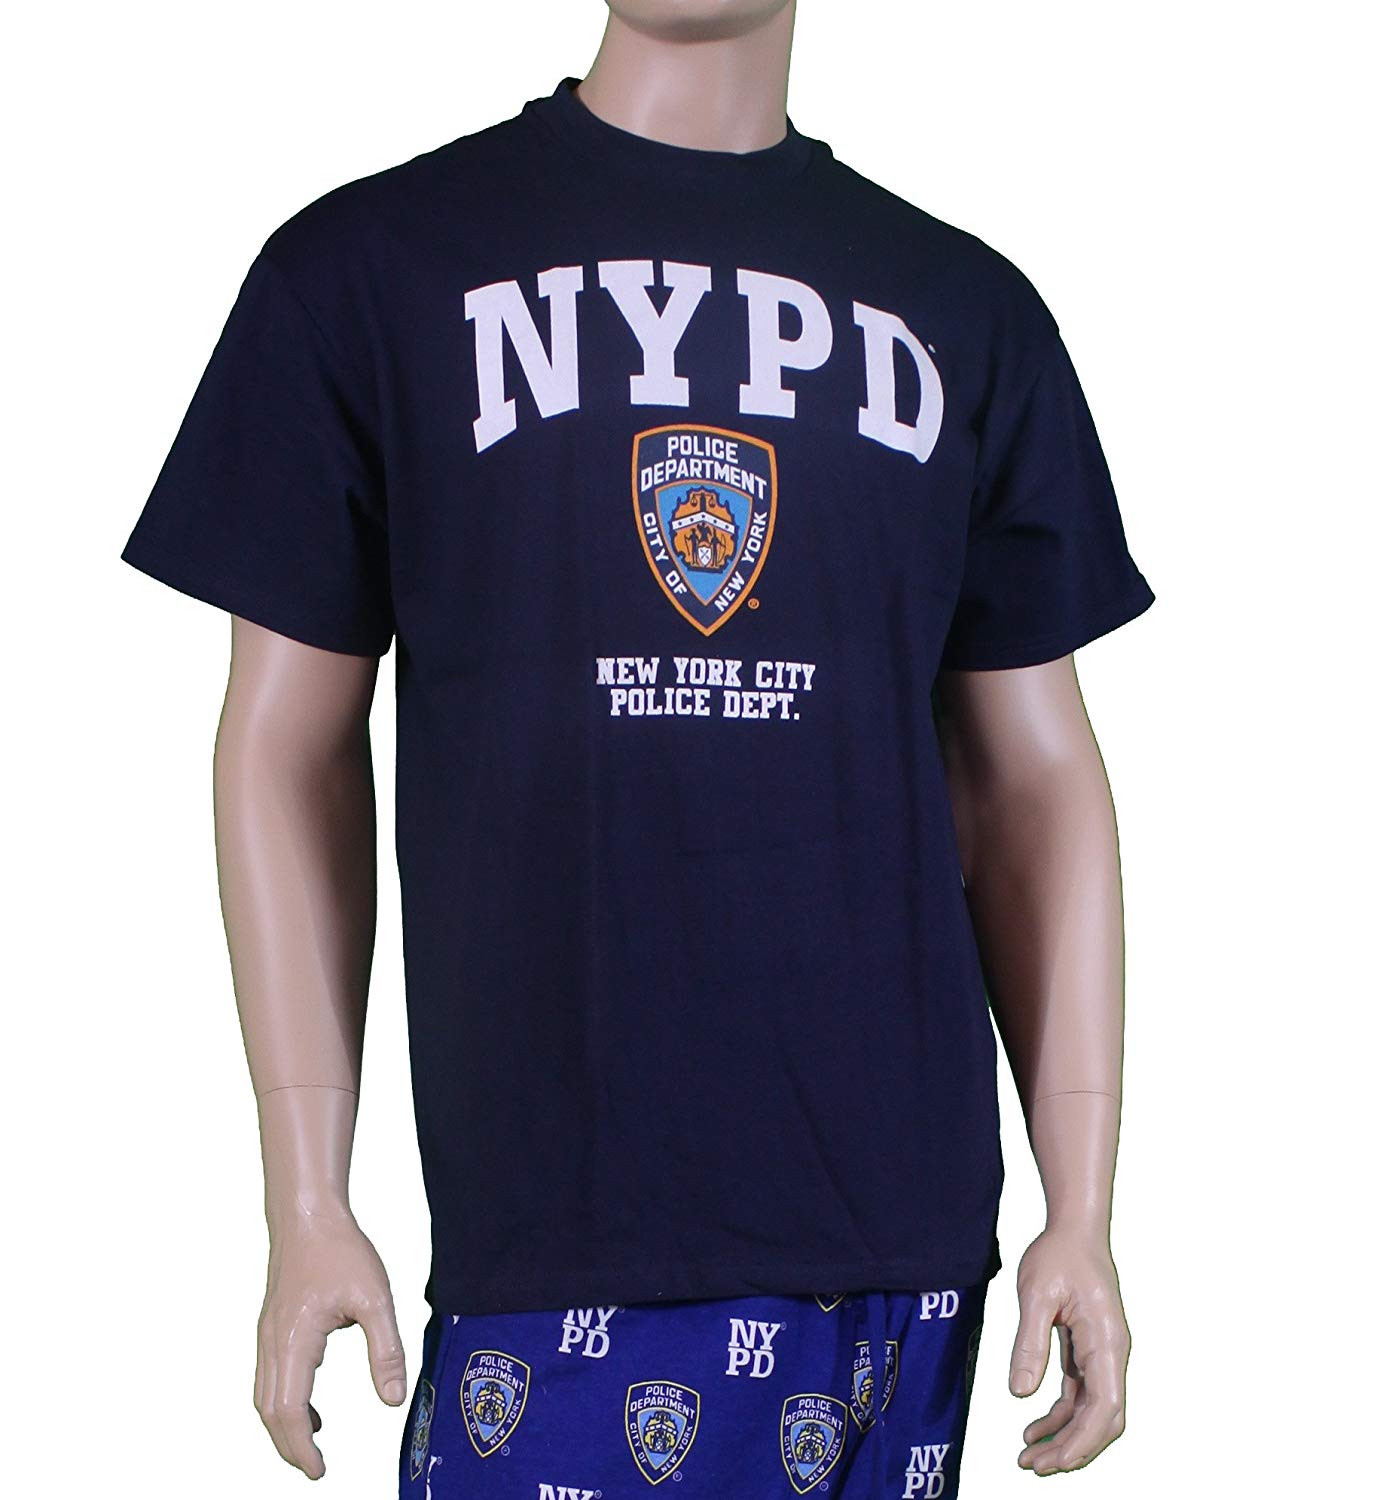 NYPD Logo - Amazon.com: NYC FACTORY NYPD Short Sleeve with NYPD Logo and Shield ...